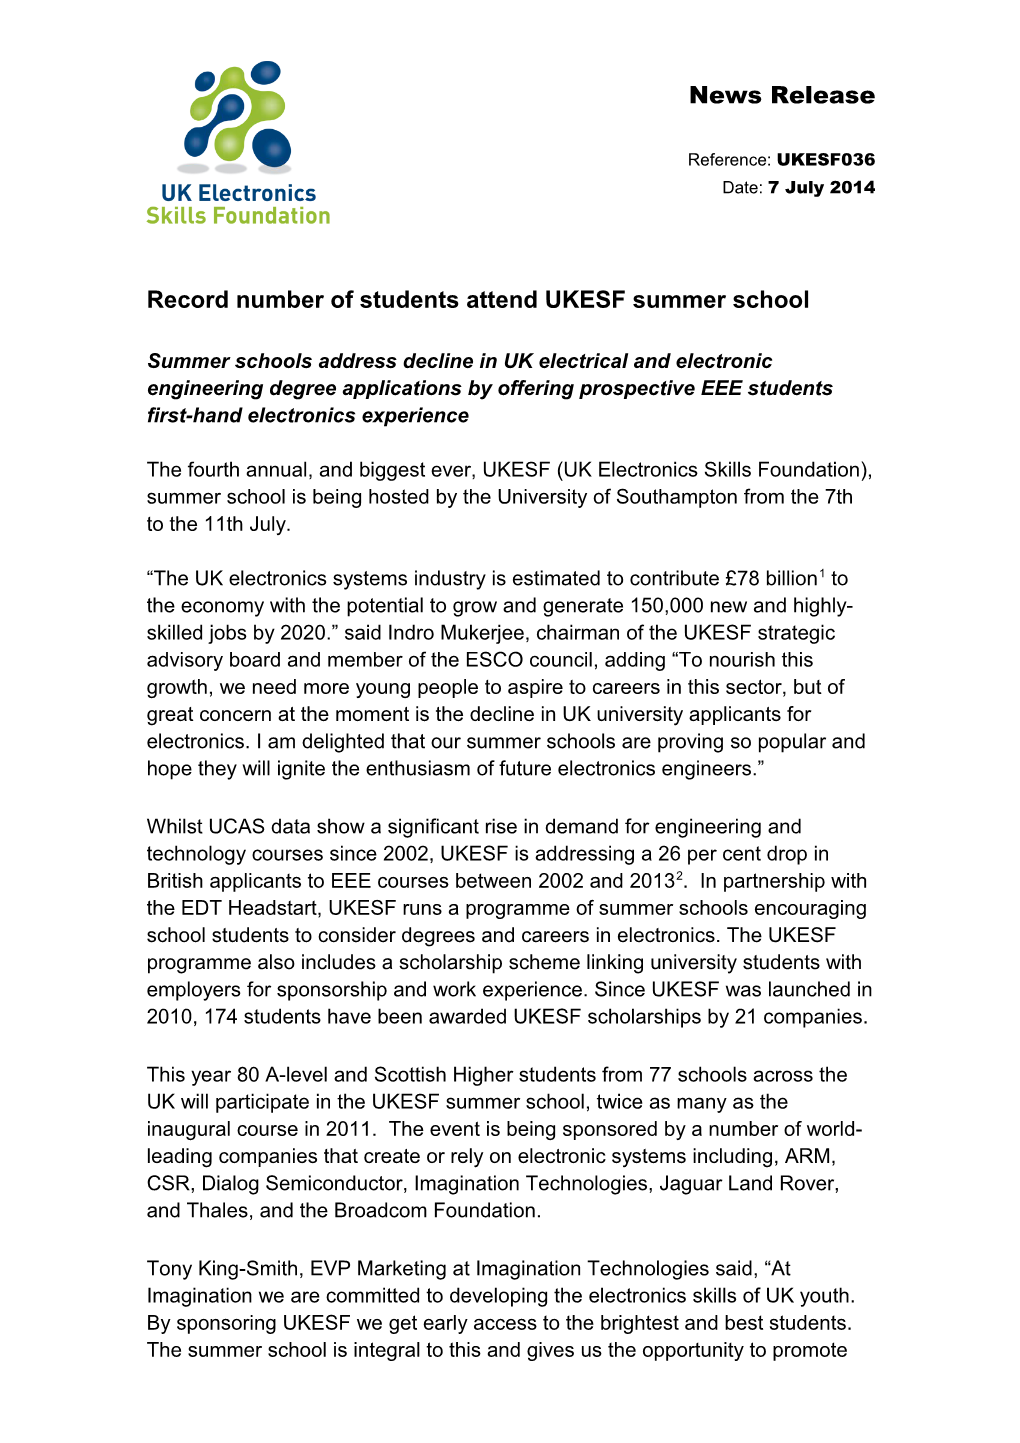 Record Number of Students Attend UKESF Summer School